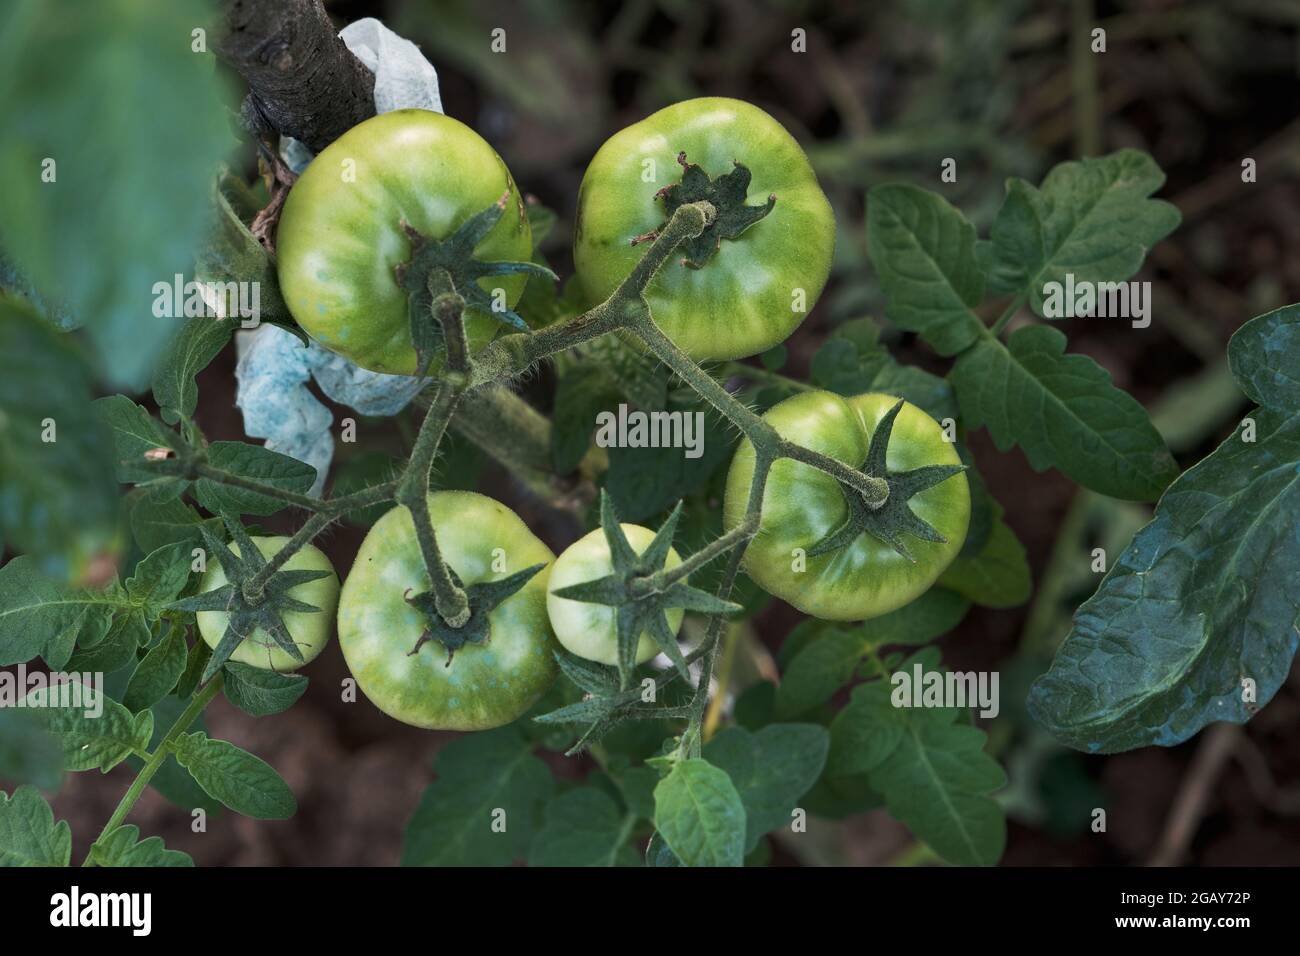 Tomato plant green fruits ripening in the hothouse Stock Photo